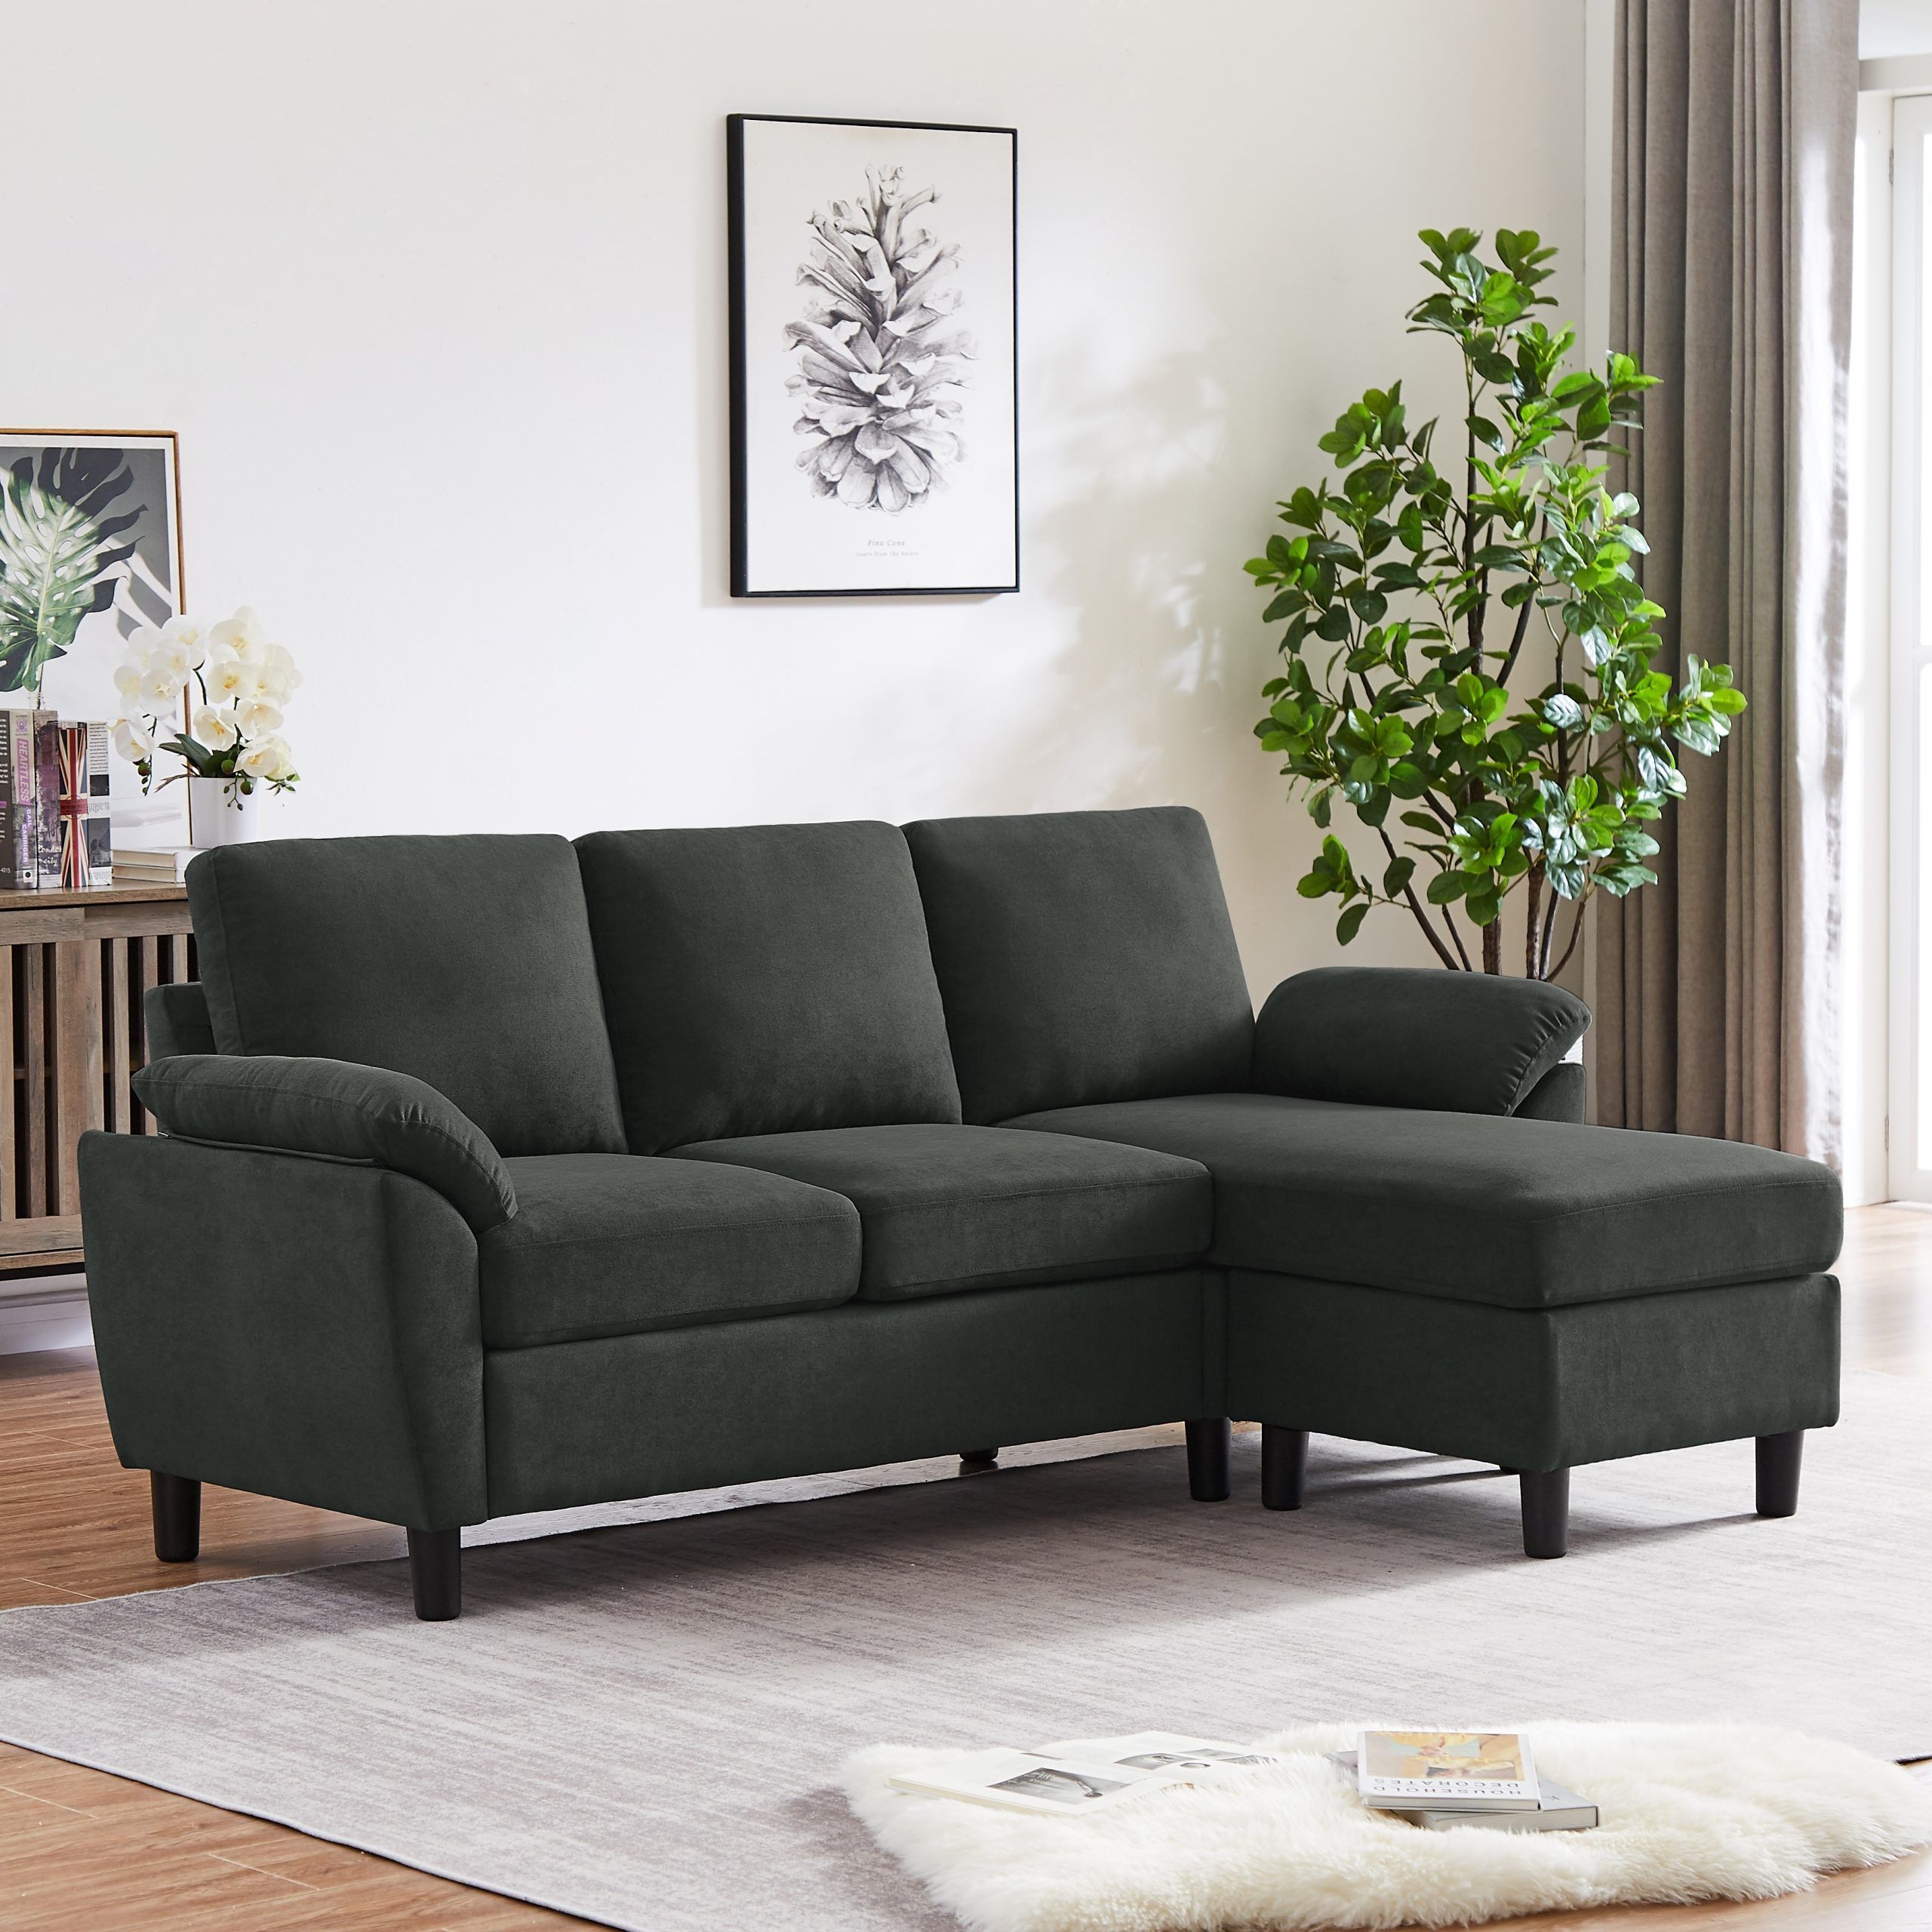 Modern Sectional Sofa Couch L Shaped With Removable Armrest, Convertible  Couch With Reversible Ottoman For Living Room – Bed Bath & Beyond – 36983057 Within Convertible L Shaped Sectional Sofas (View 4 of 15)